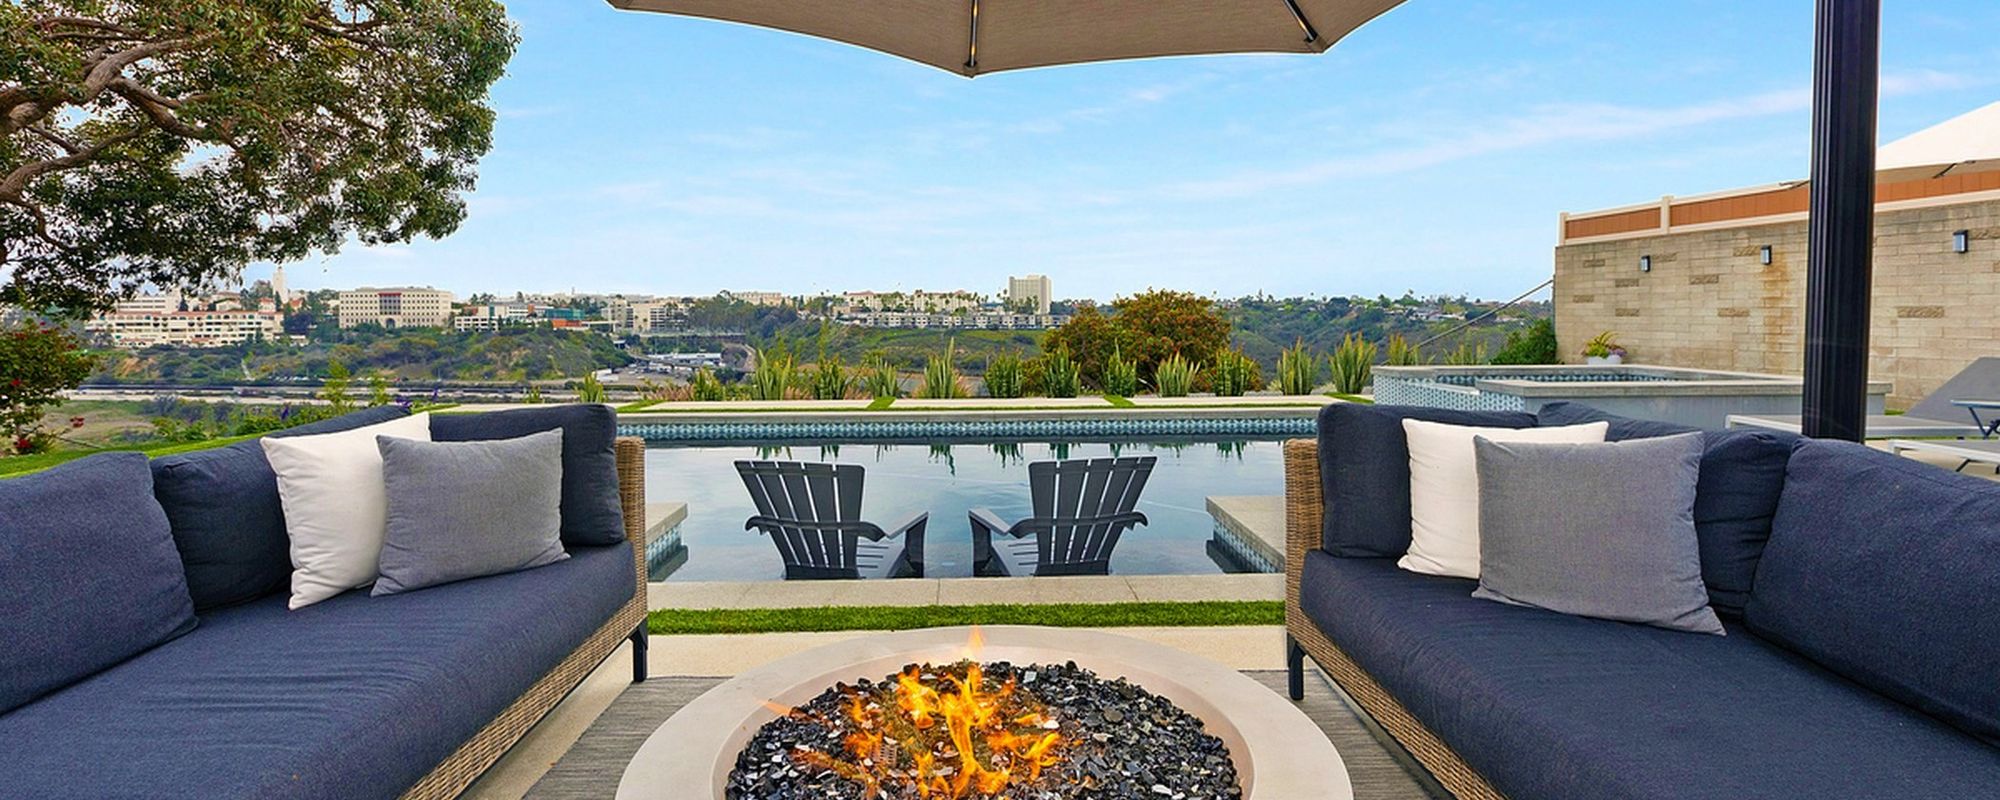 Outdoor fire pit at San Diego vacation rental